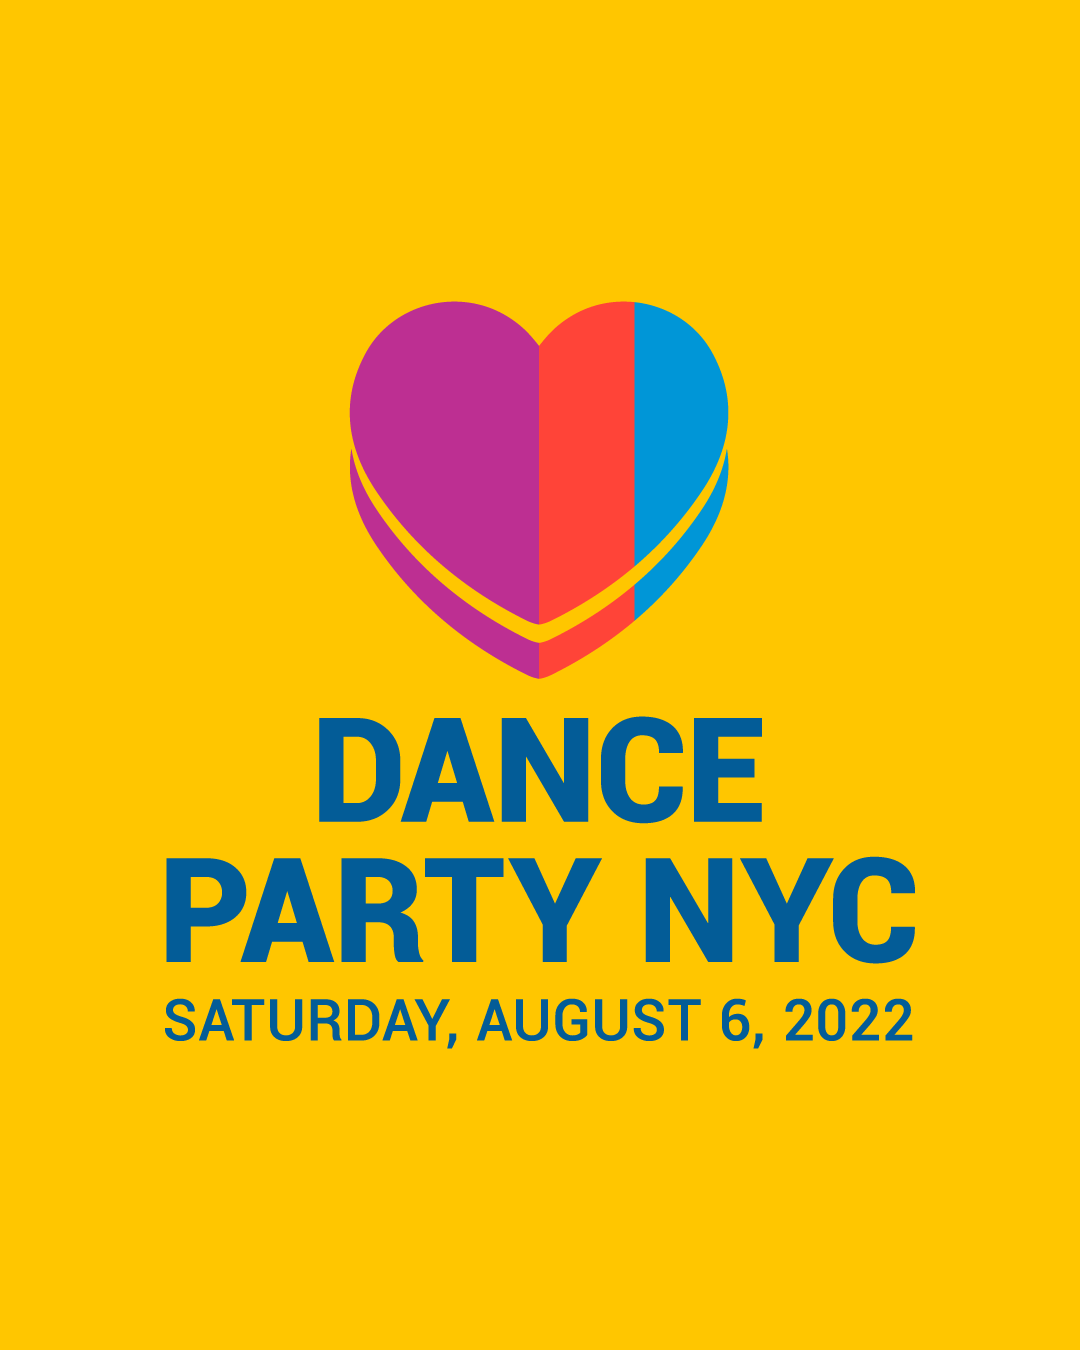 Dance Party NYC Social 1080x1350